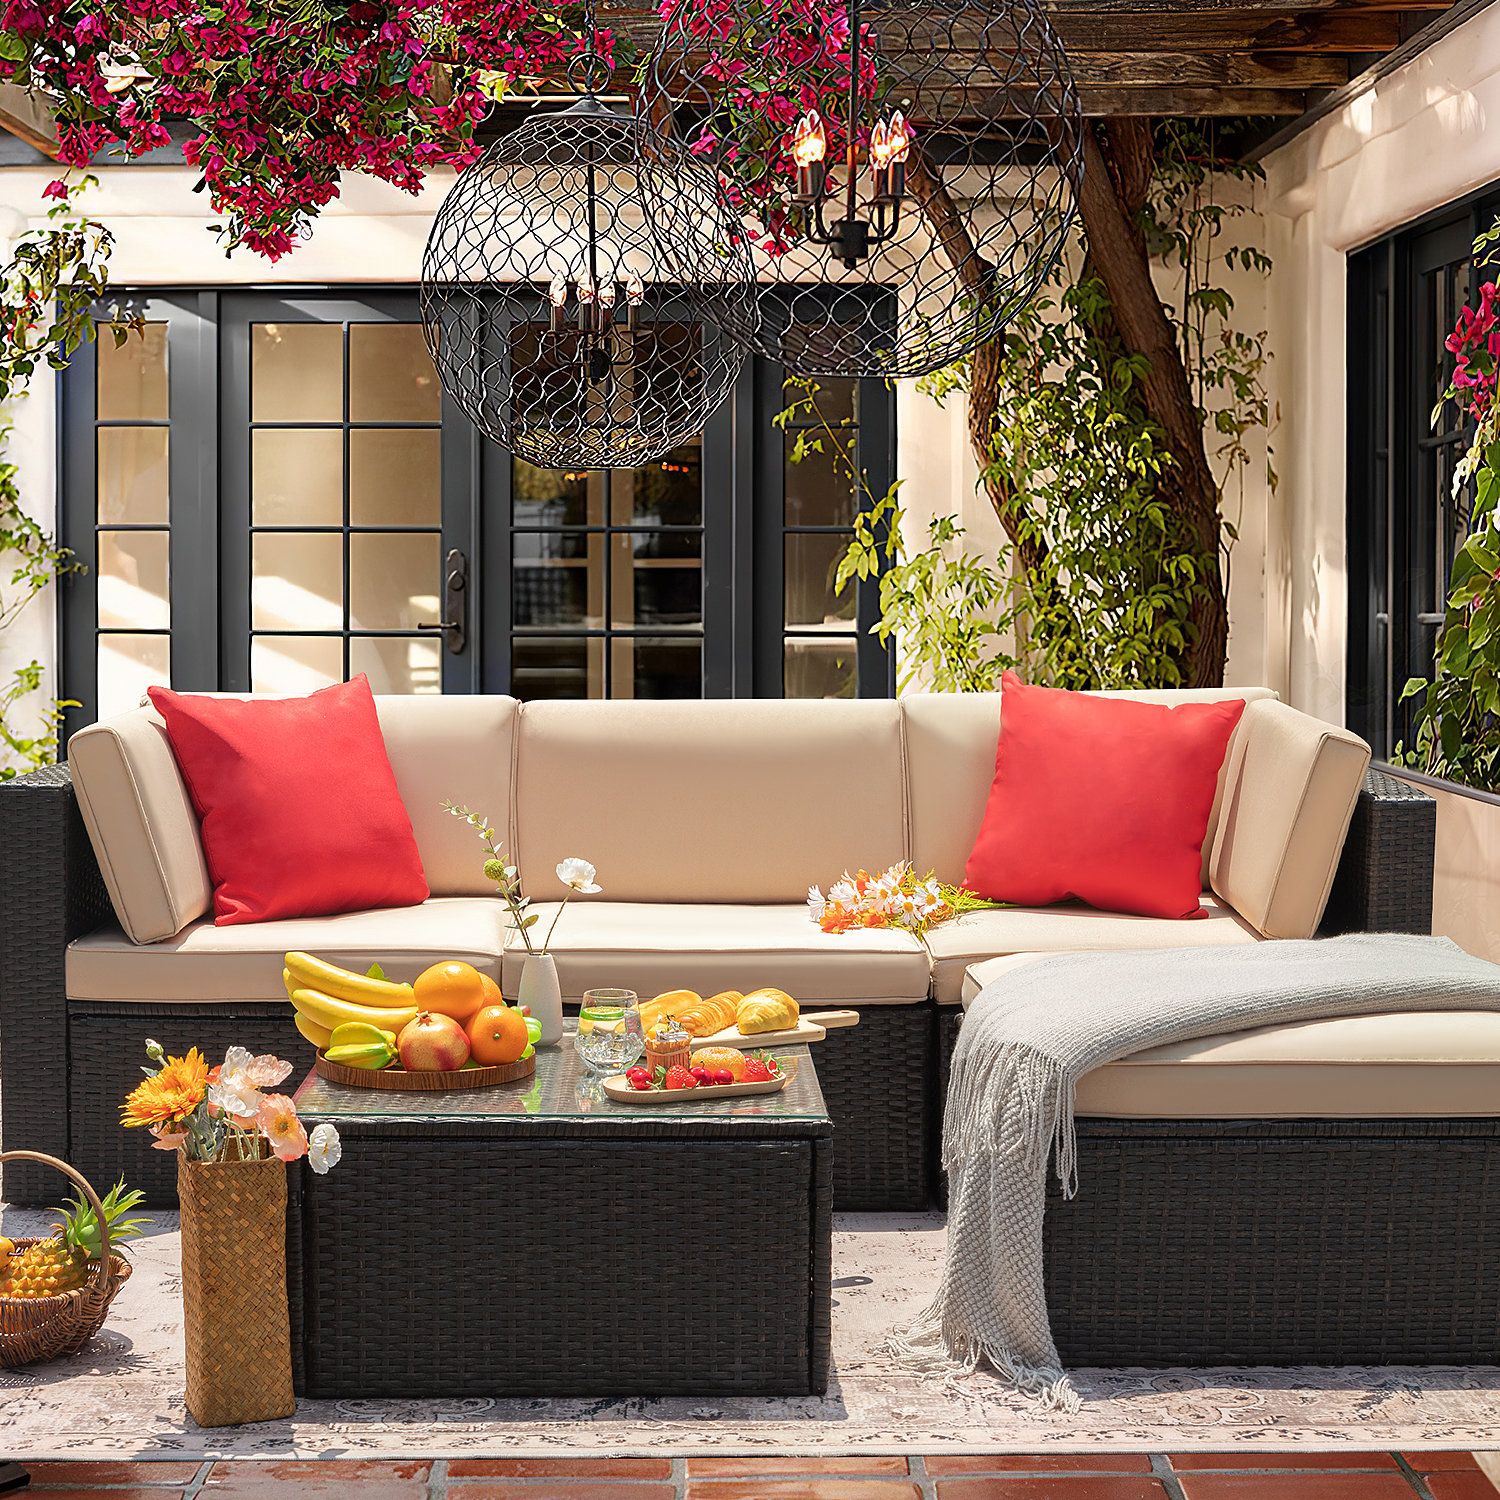 Brayden Studio® Huang 4 – Person Outdoor Seating Group With Cushions &  Reviews | Wayfair With All Weather Rattan Conversation Set (View 12 of 15)